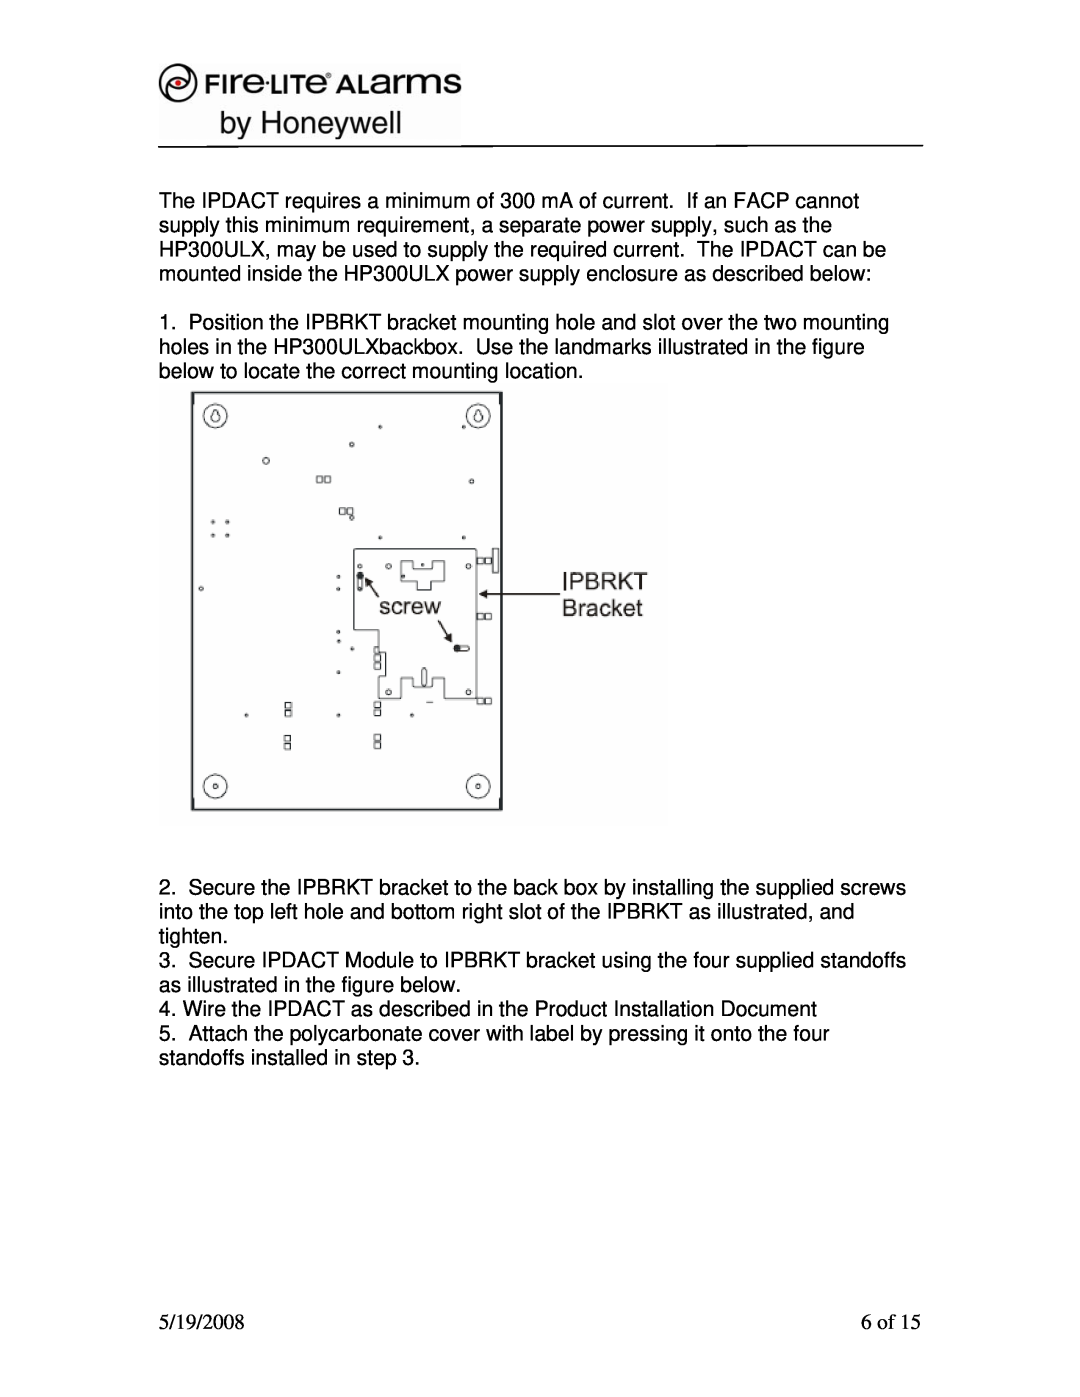 Honeywell Smoke Alarm installation instructions Wire the IPDACT as described in the Product Installation Document 